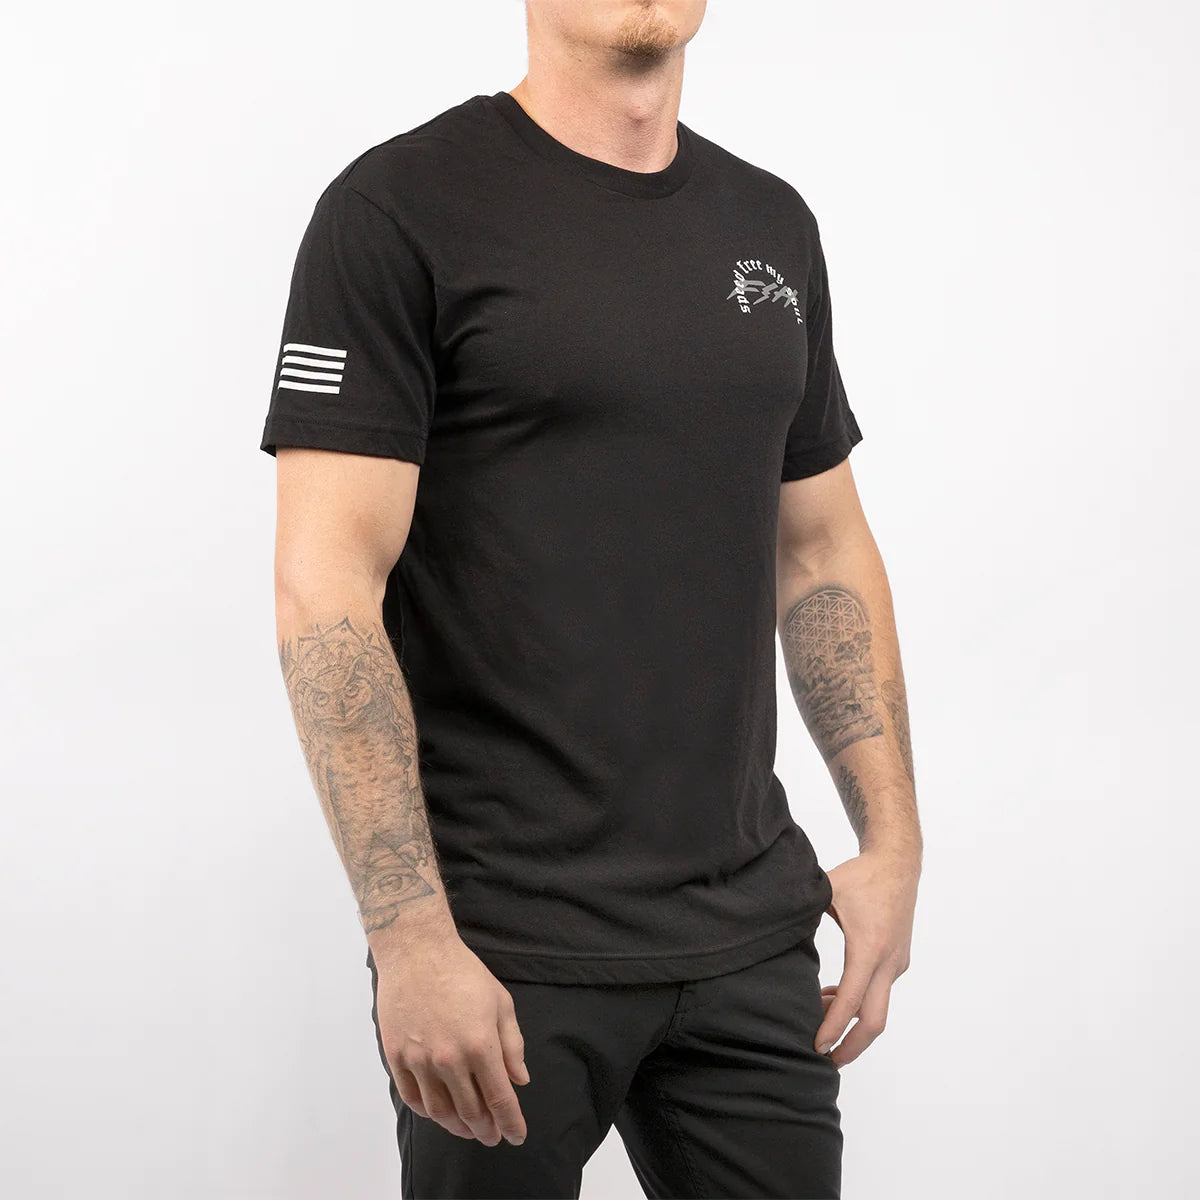 Fasthouse Menace SS Tech Tee